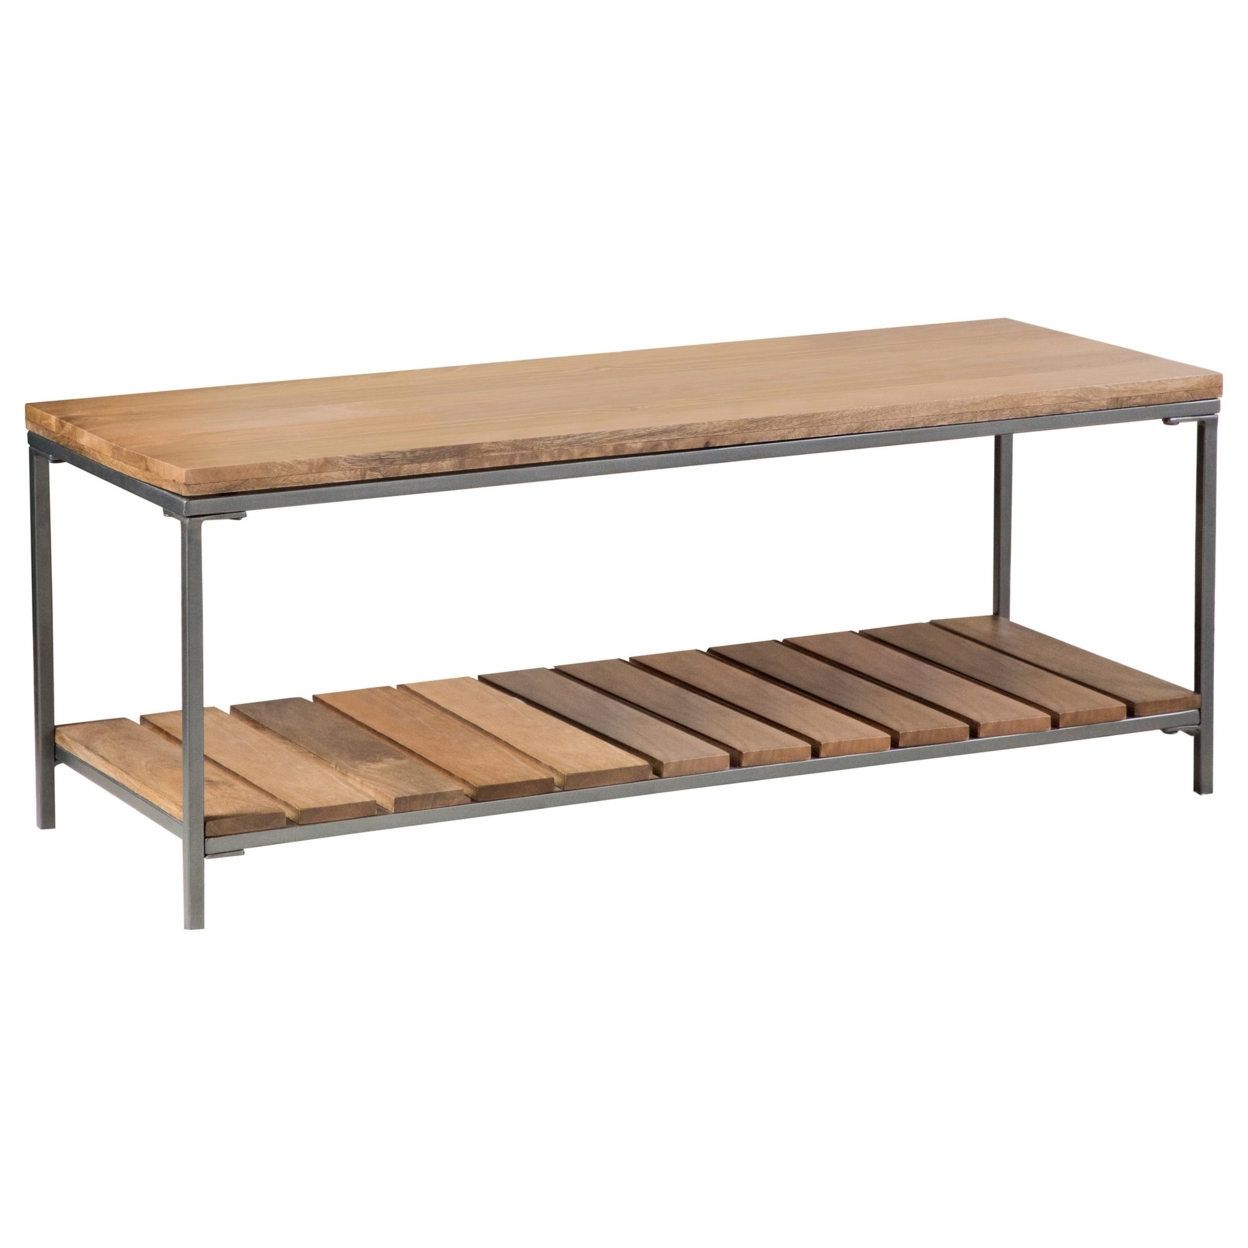 Accent Bench With 1 Slatted Shelf And Tubular Metal Legs, Natural Brown- Saltoro Sherpi